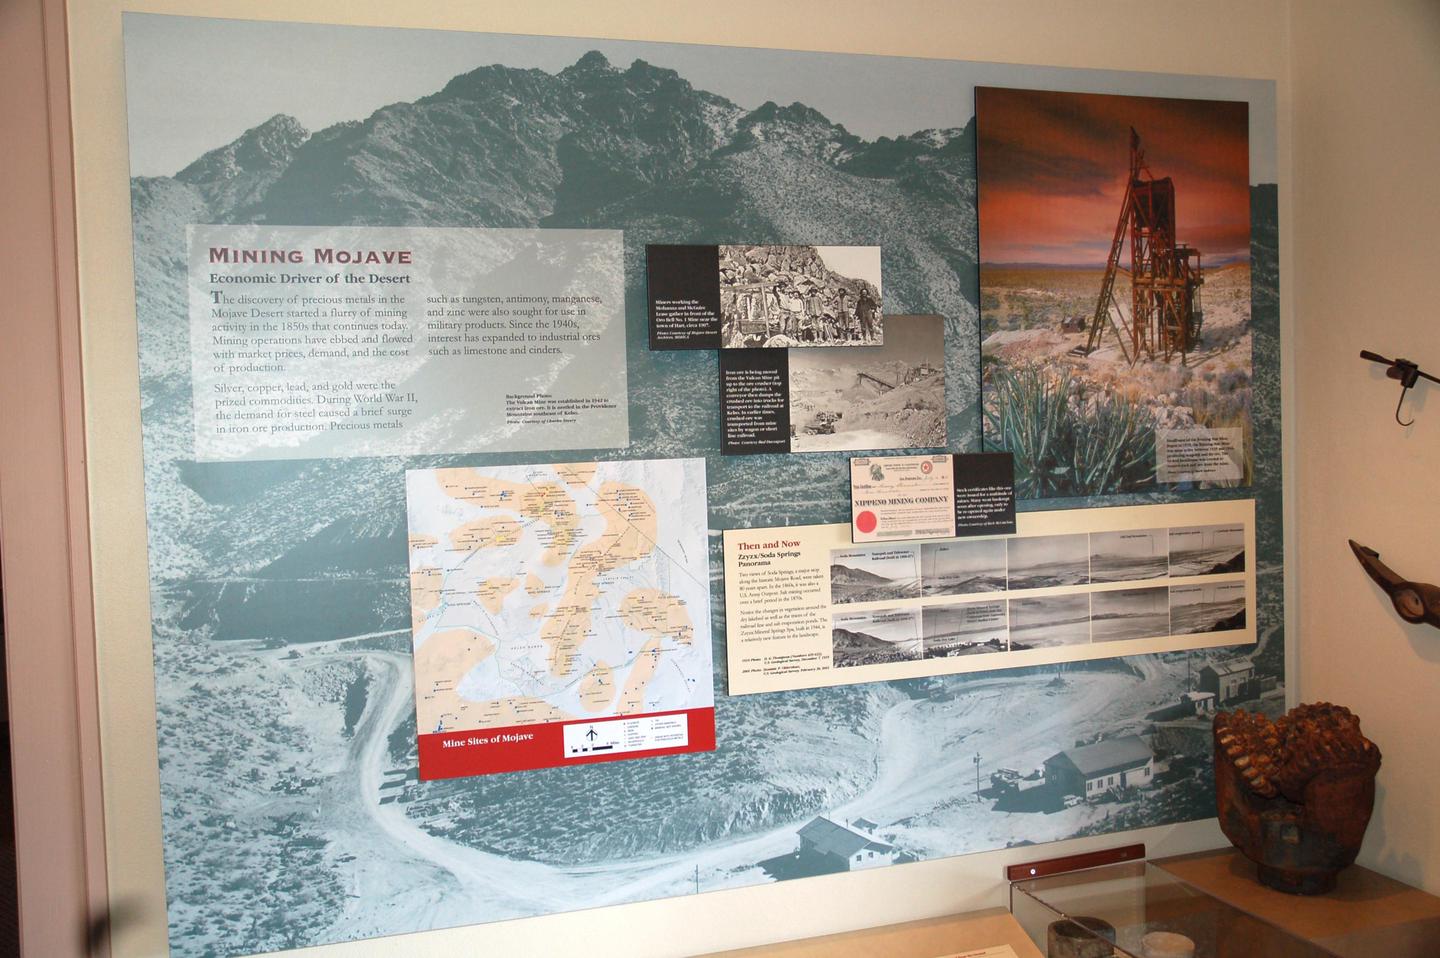 Mining exhibitExhibits in the Kelso Depot Museum are mostly wall-mounted. There are exhibits on mining, railroads, ranching, homesteading, and natural and cultural treasures within the Preserve